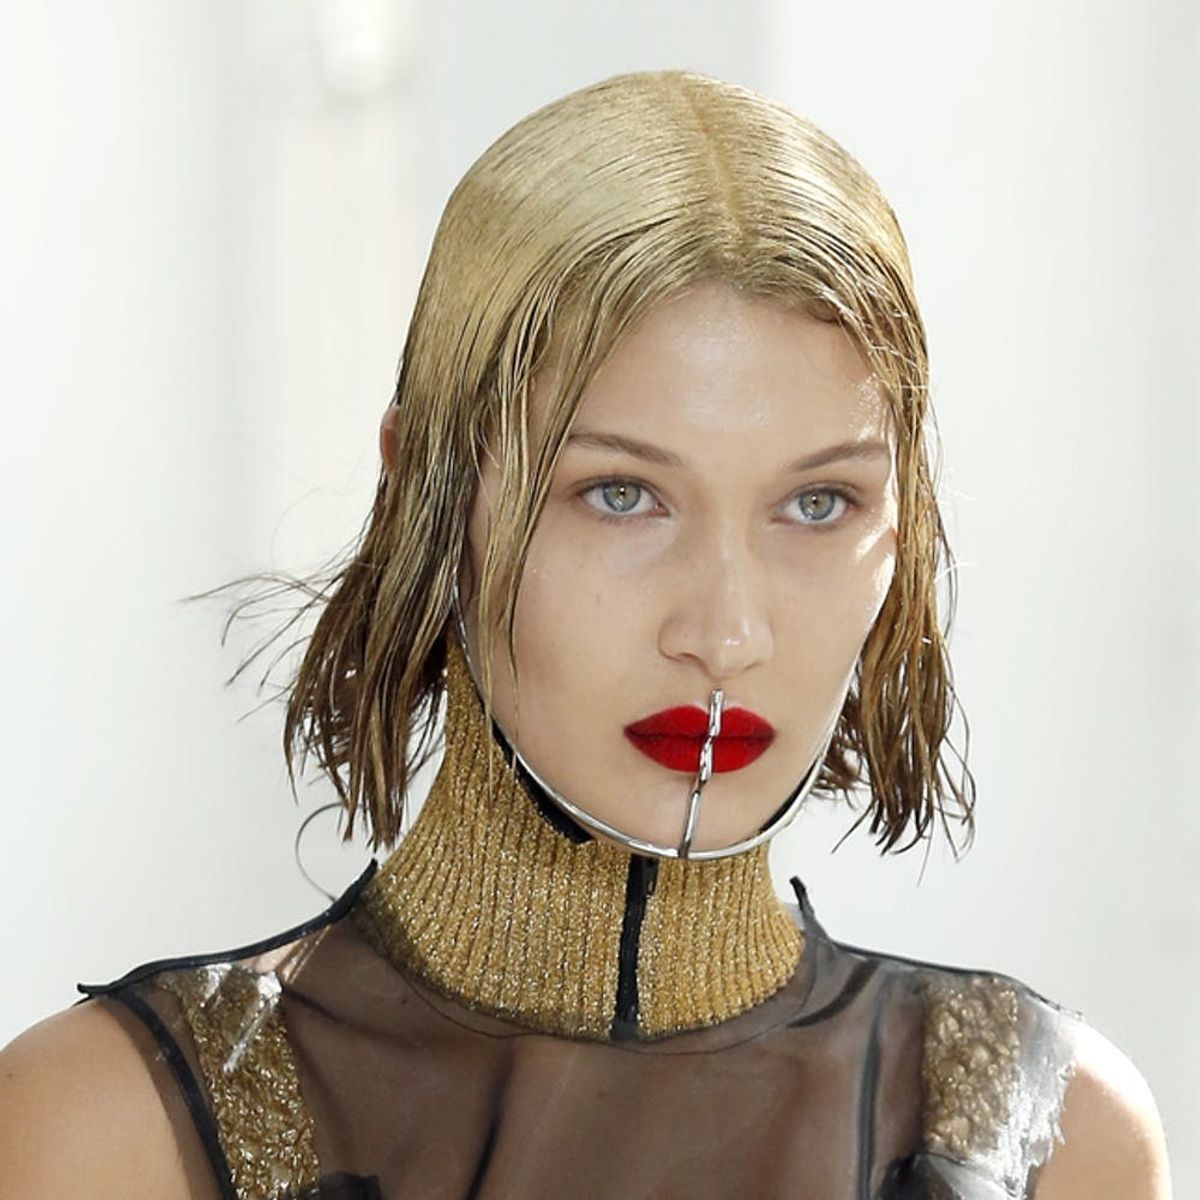 Bella Hadid Used Glitter to Go Blonde and the Result is Gorgeous